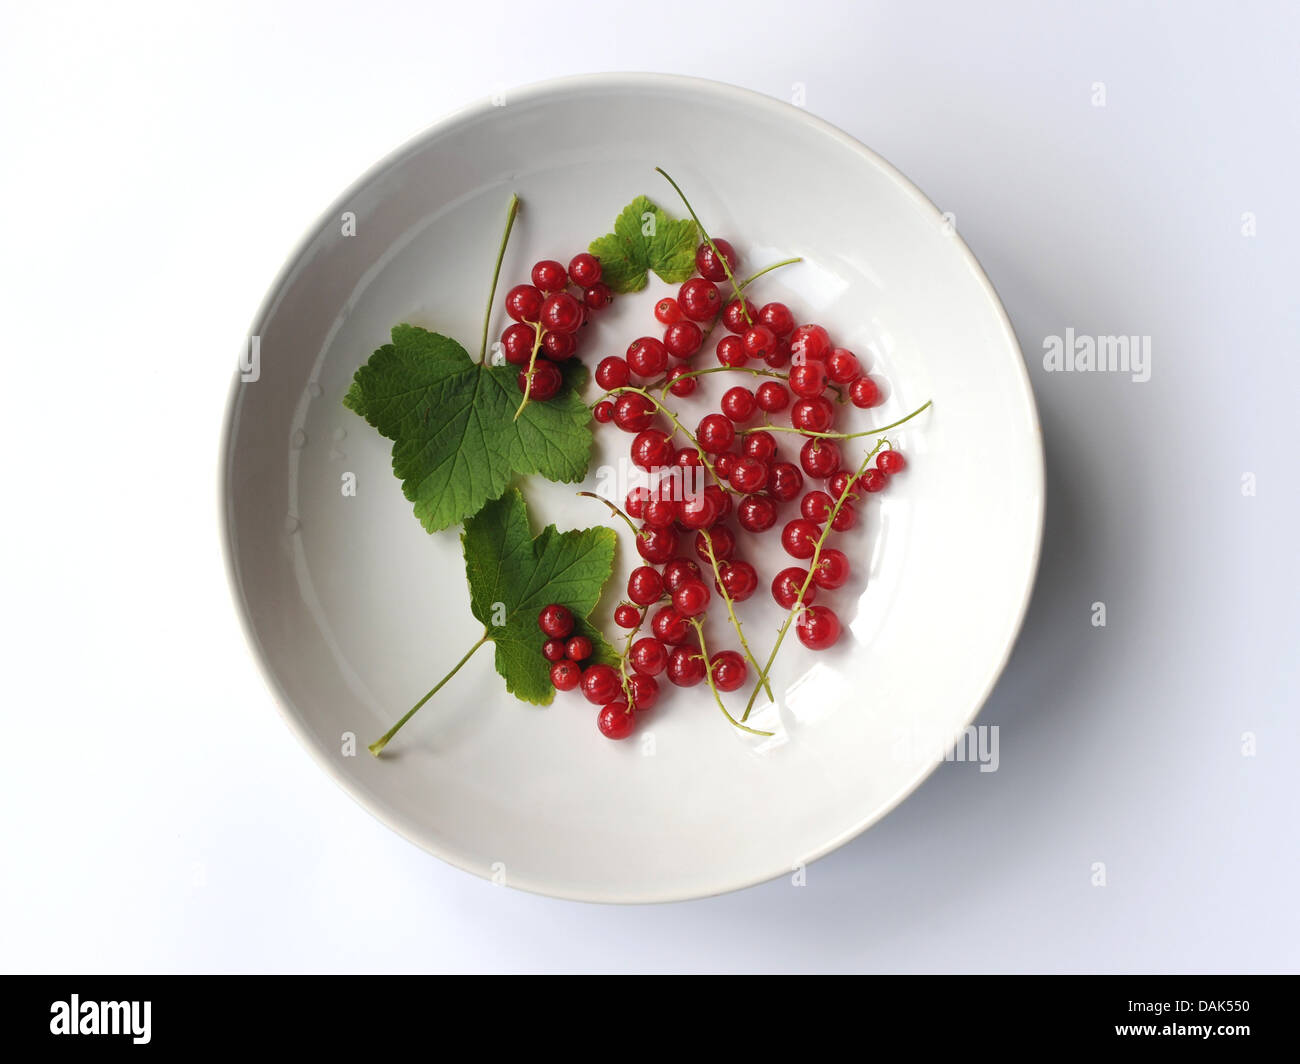 A clean white dish of redcurrants and red currant leaves. Stock Photo